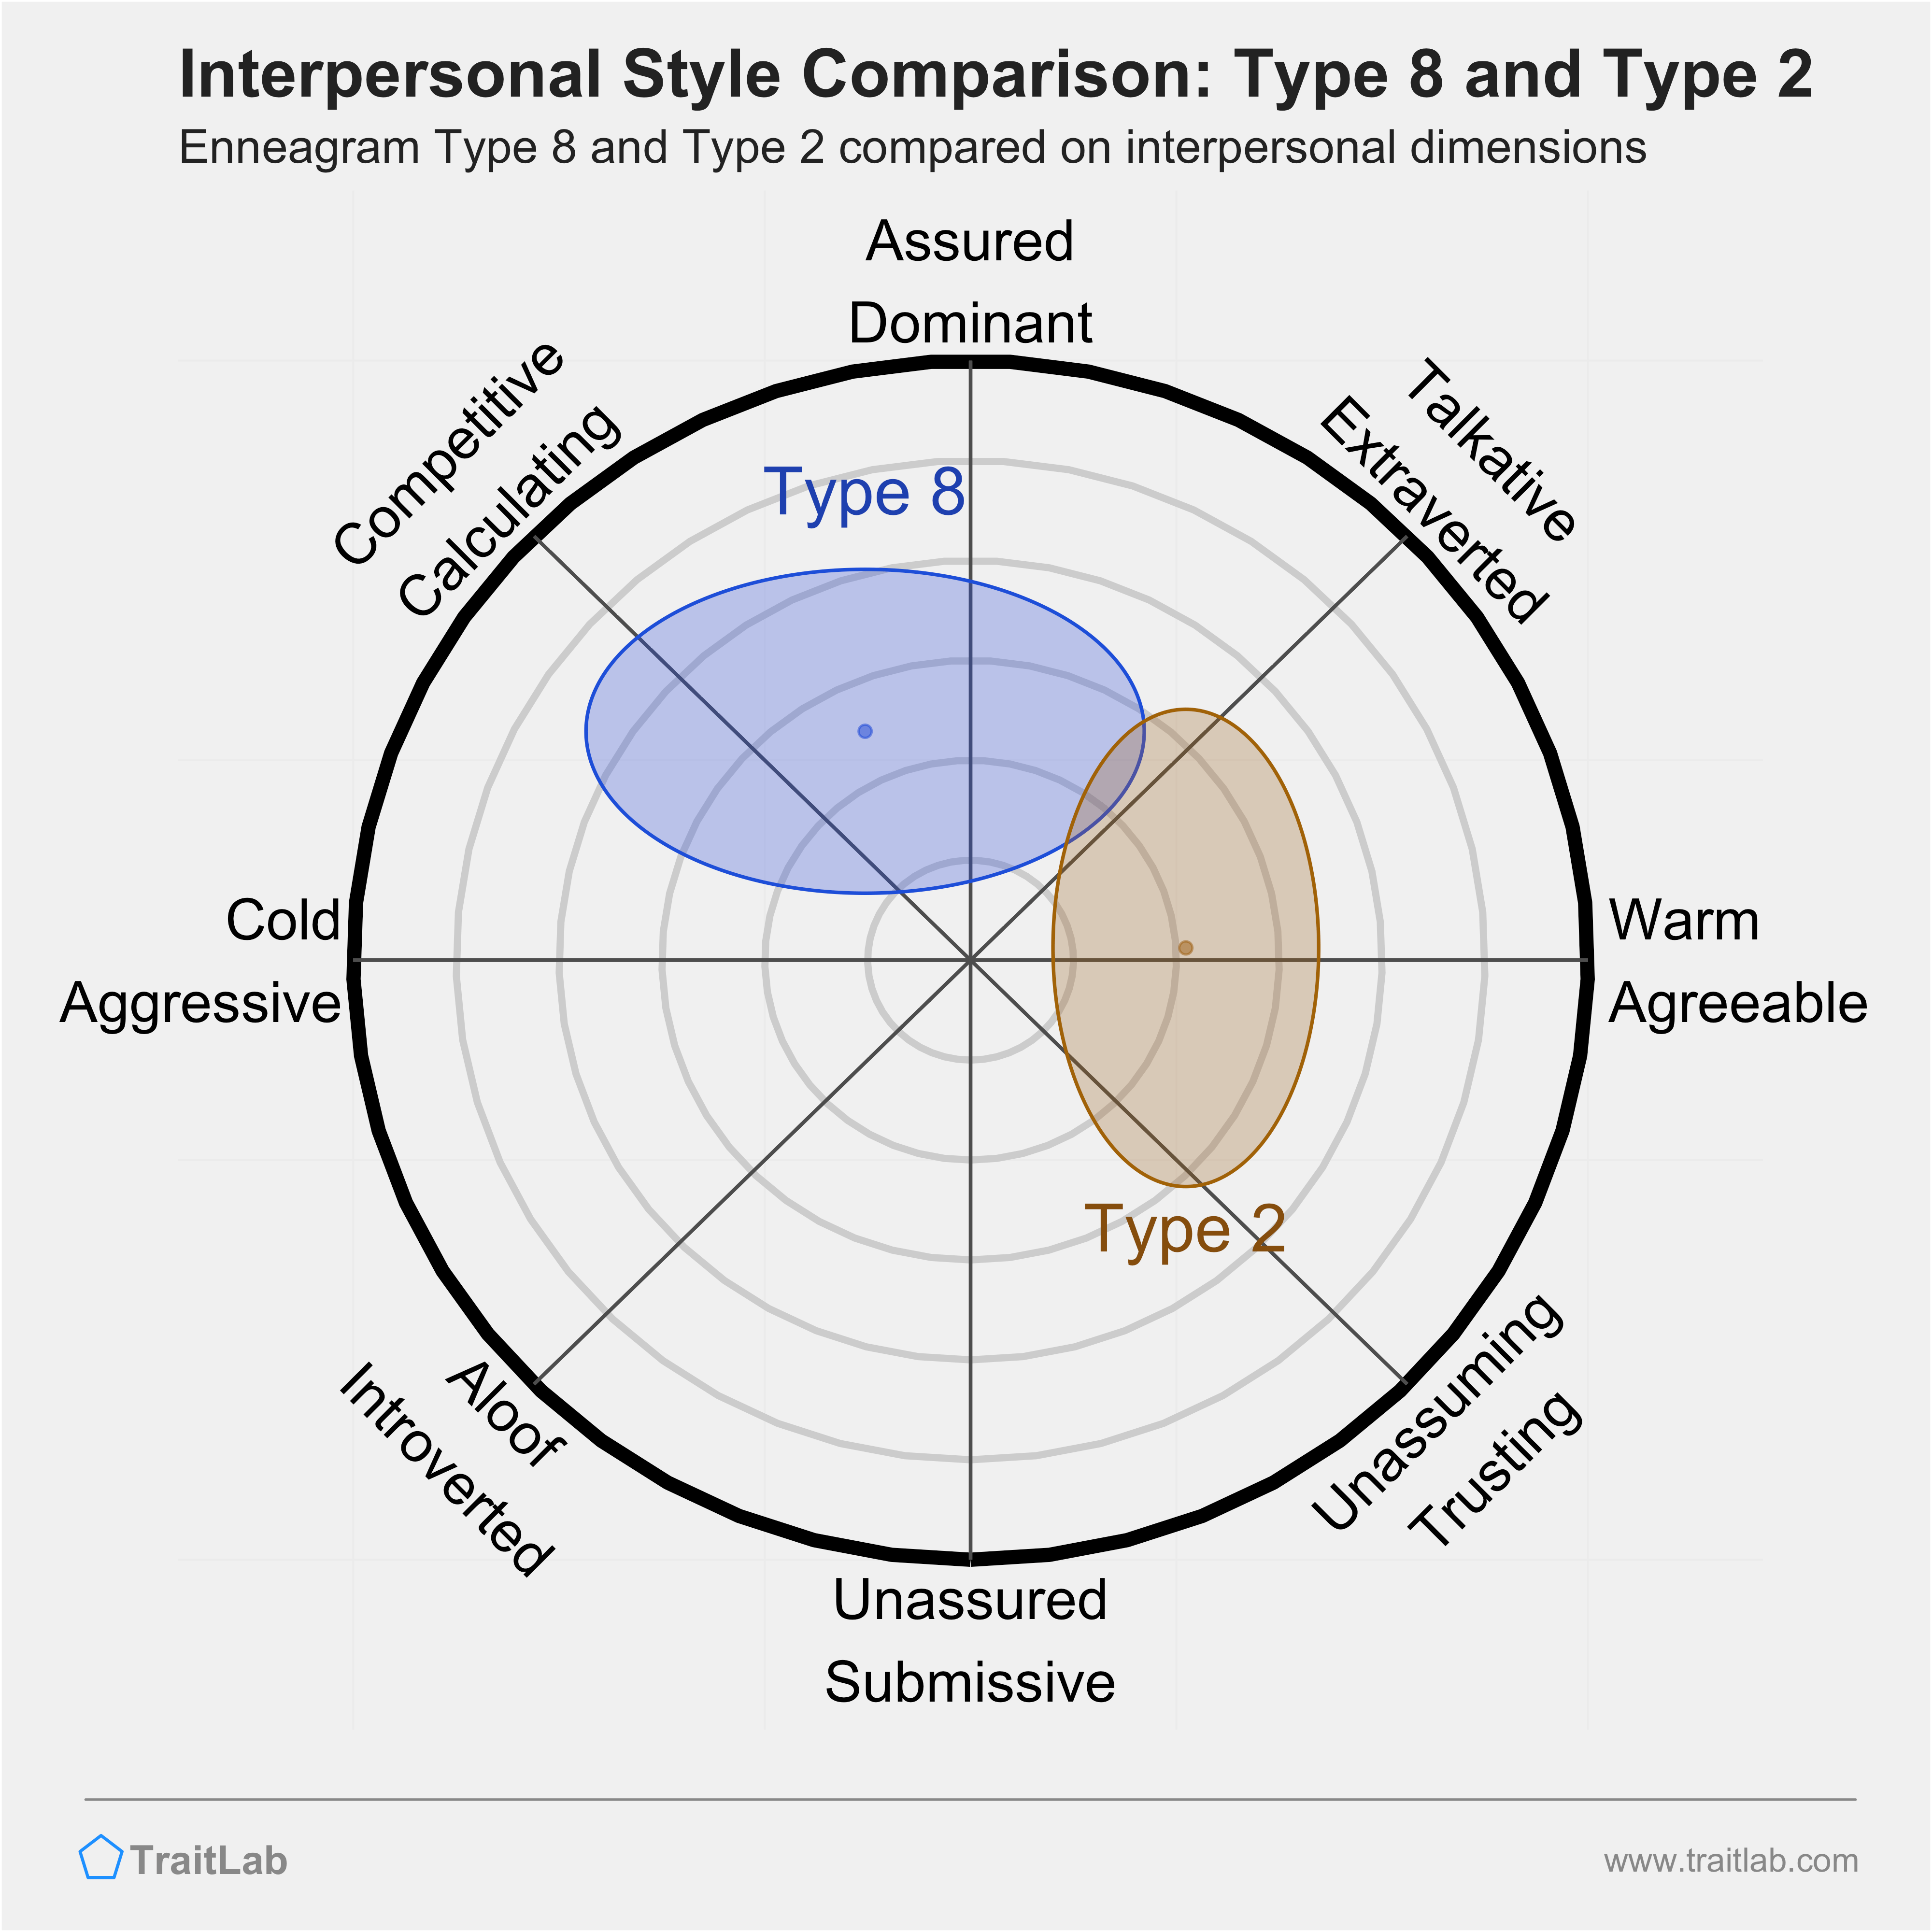 Enneagram Type 8 and Type 2 comparison across interpersonal dimensions